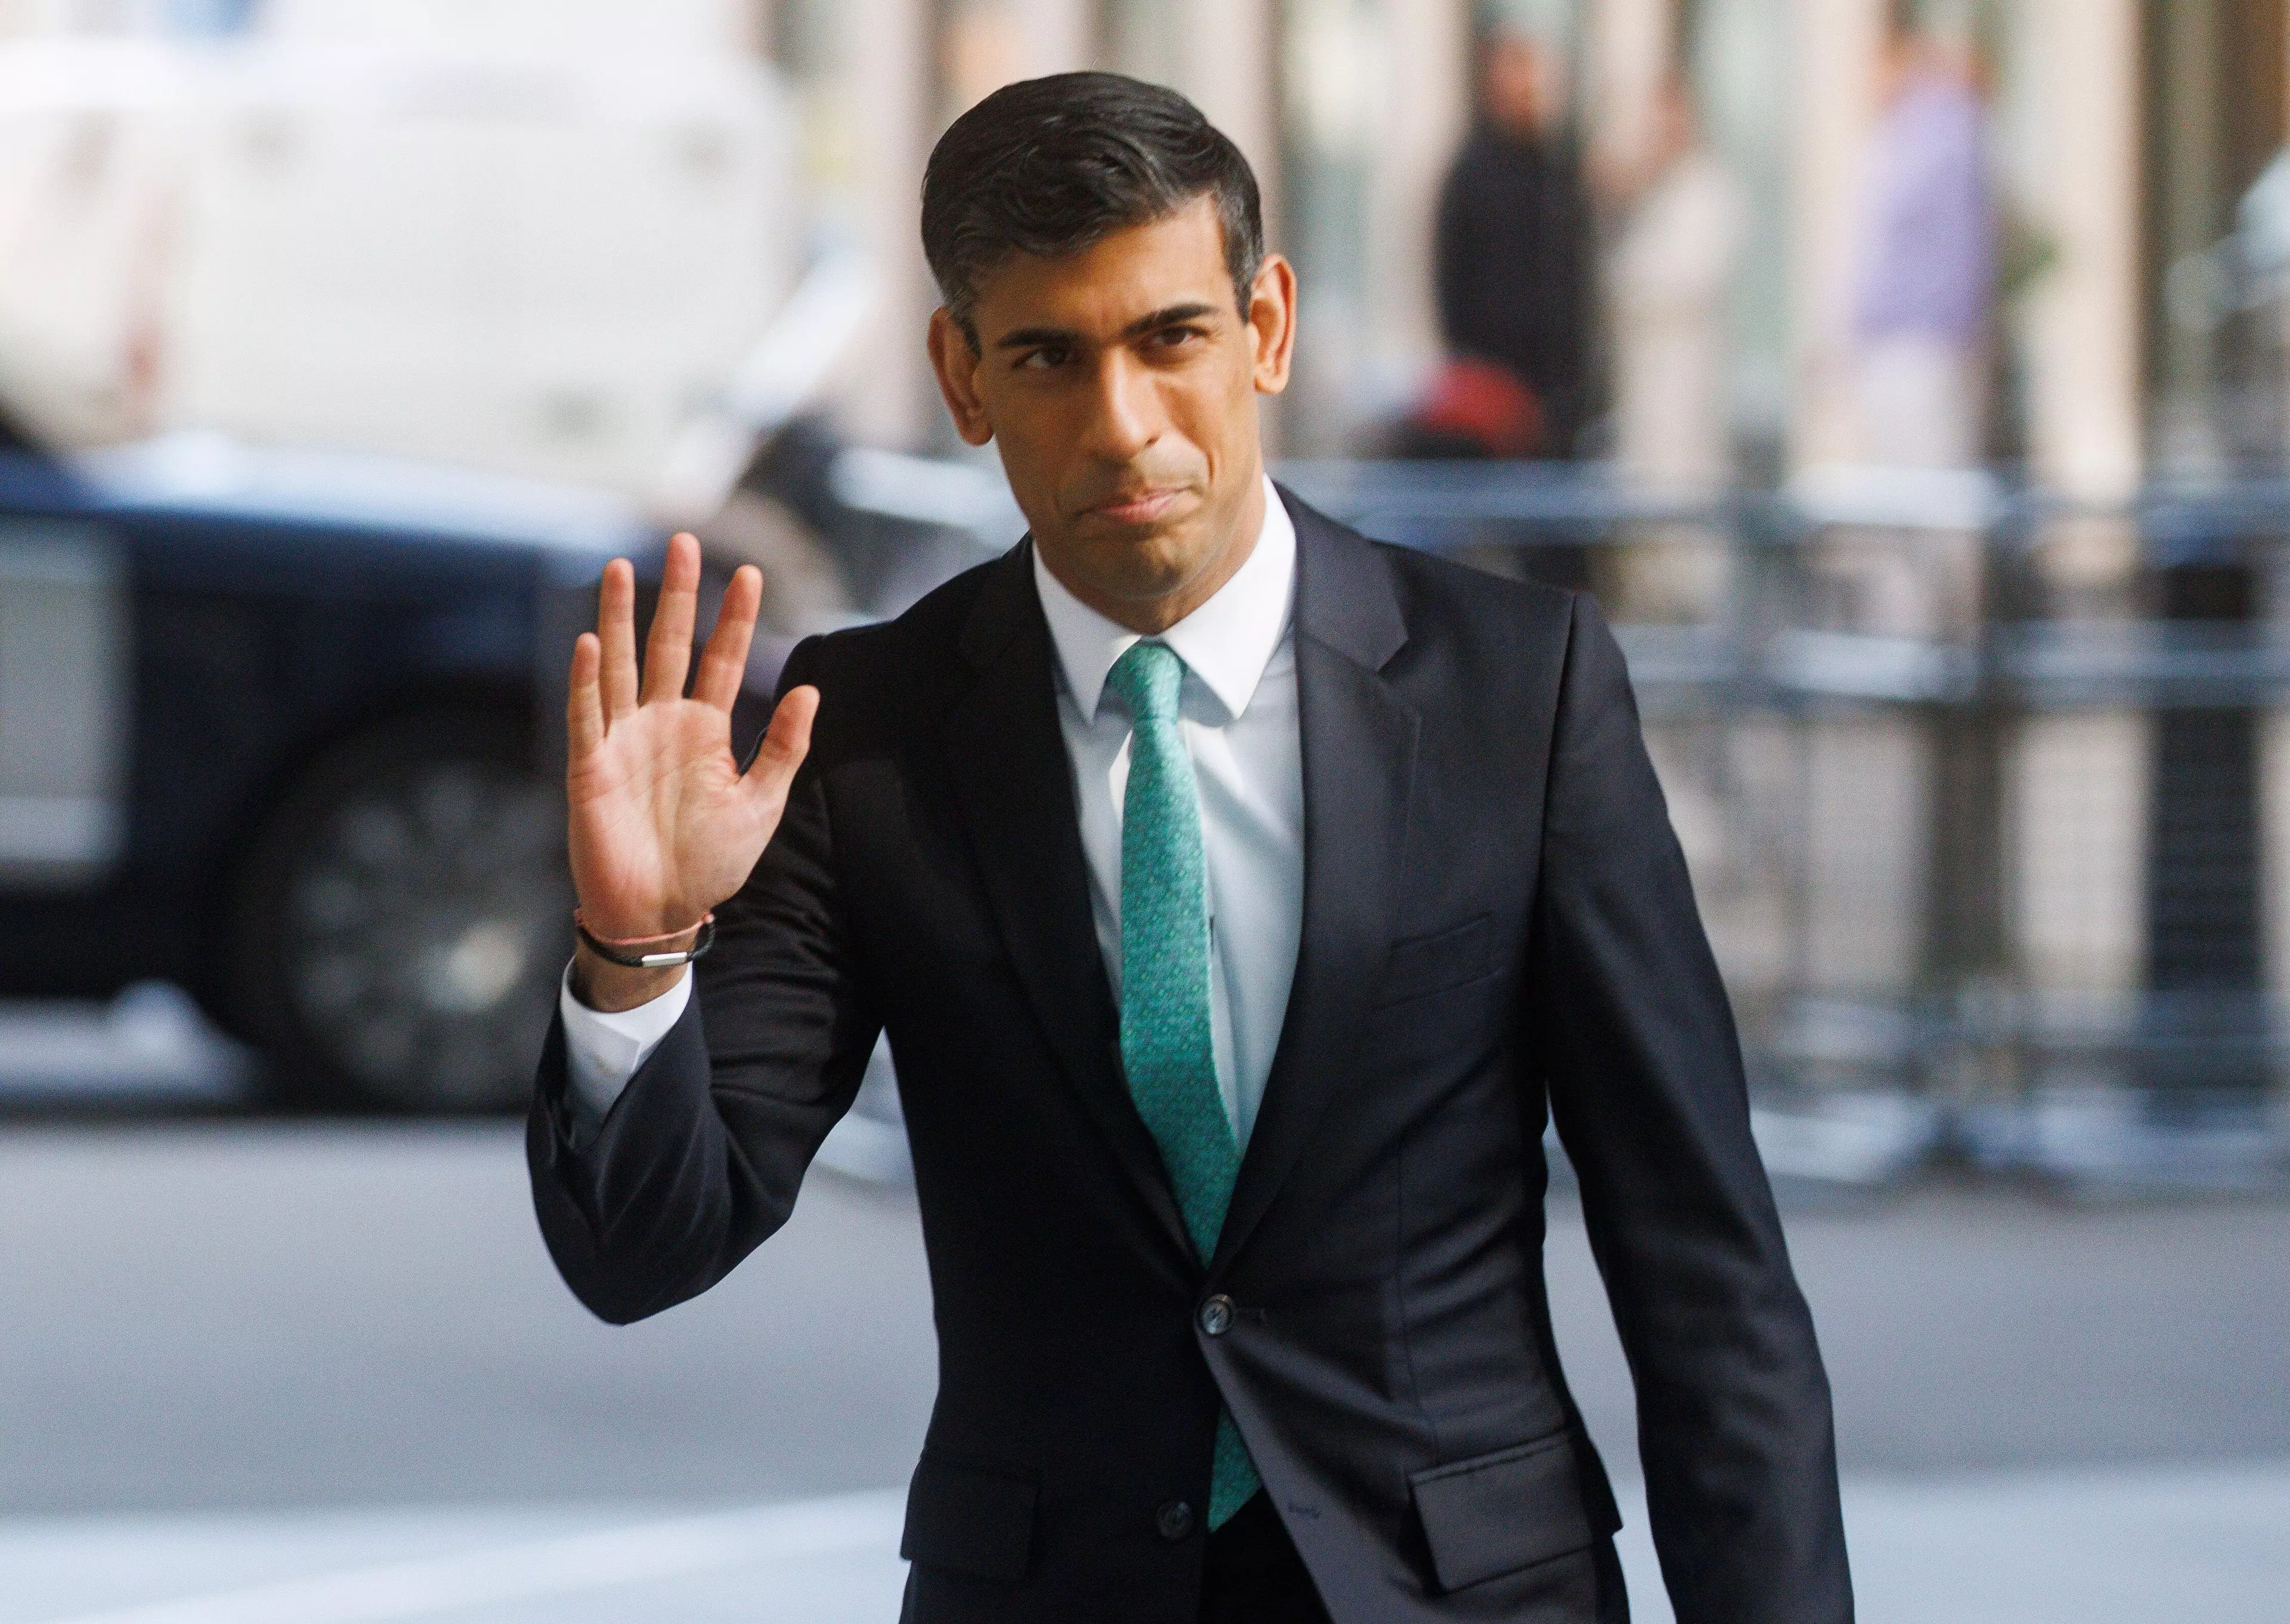 Chancellor Rishi Sunak has the chance to do something about it today.